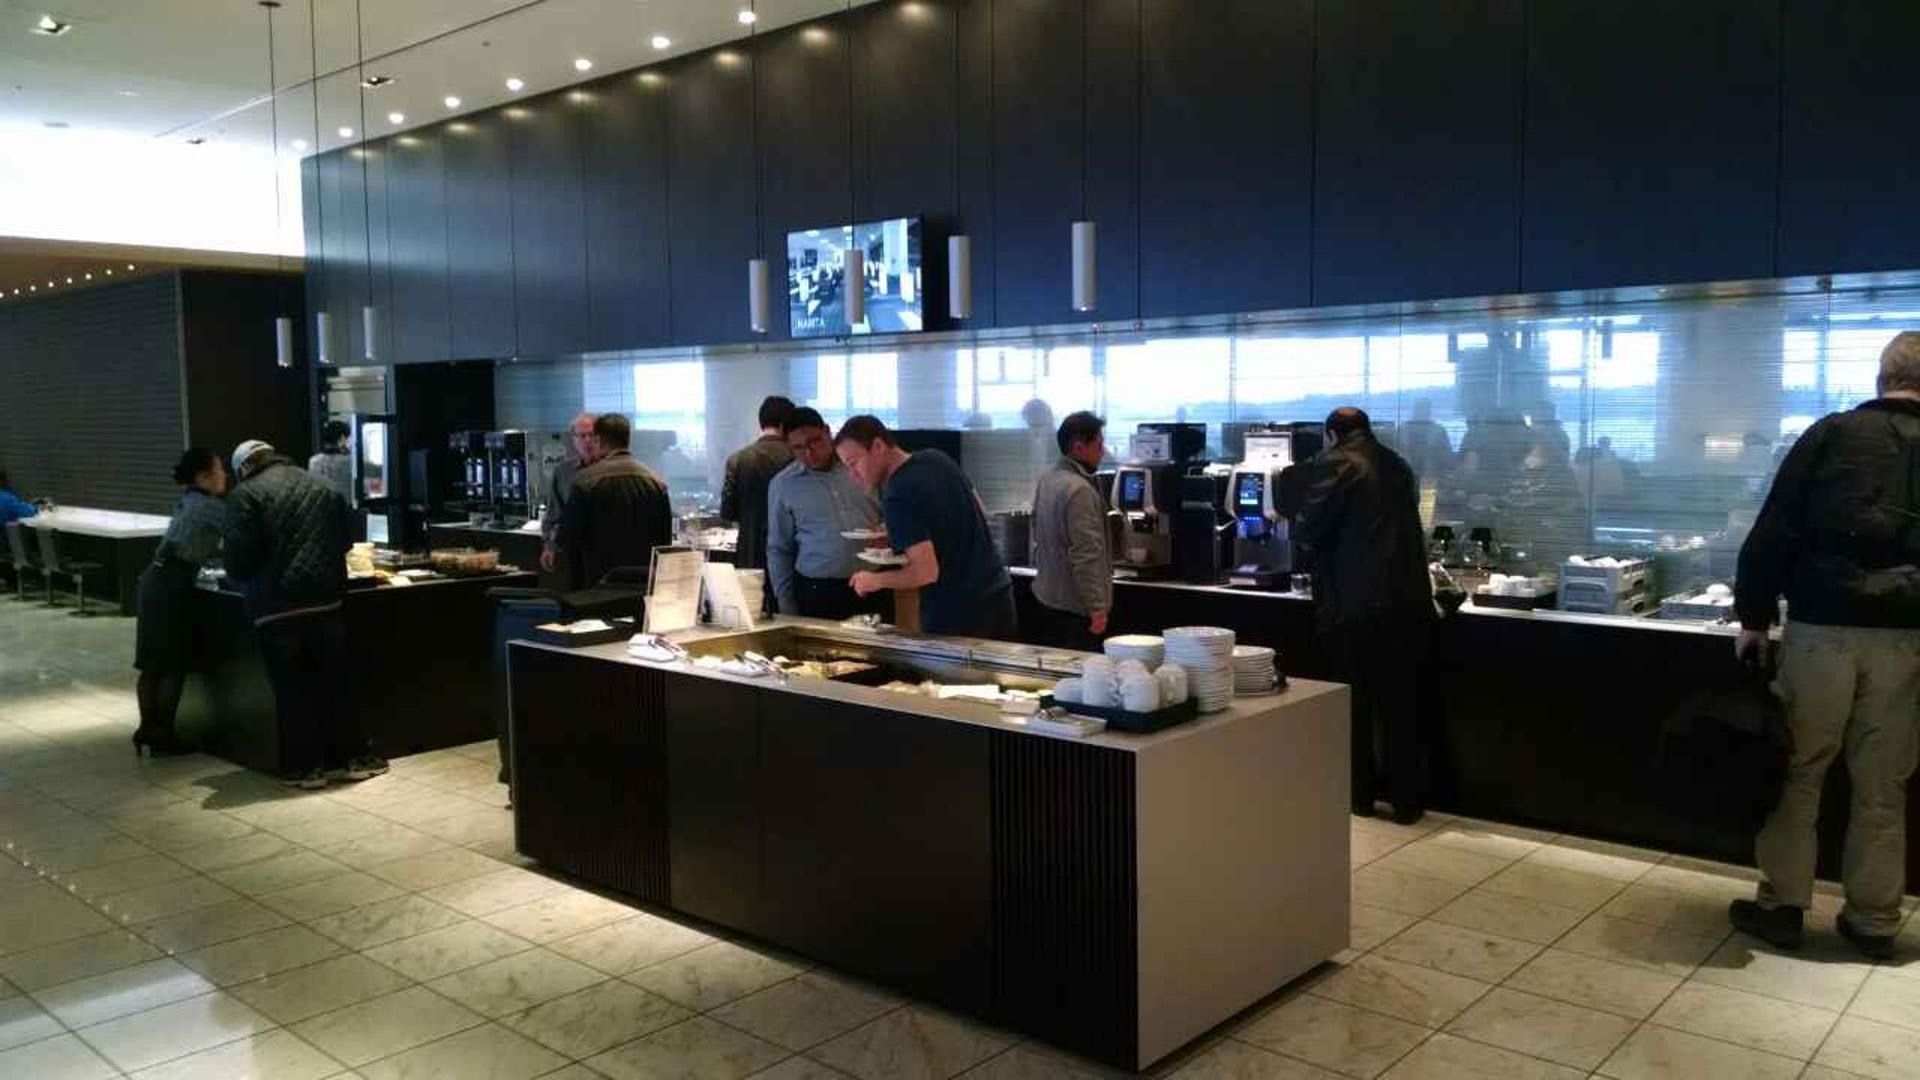 All Nippon Airways ANA Lounge image 24 of 39